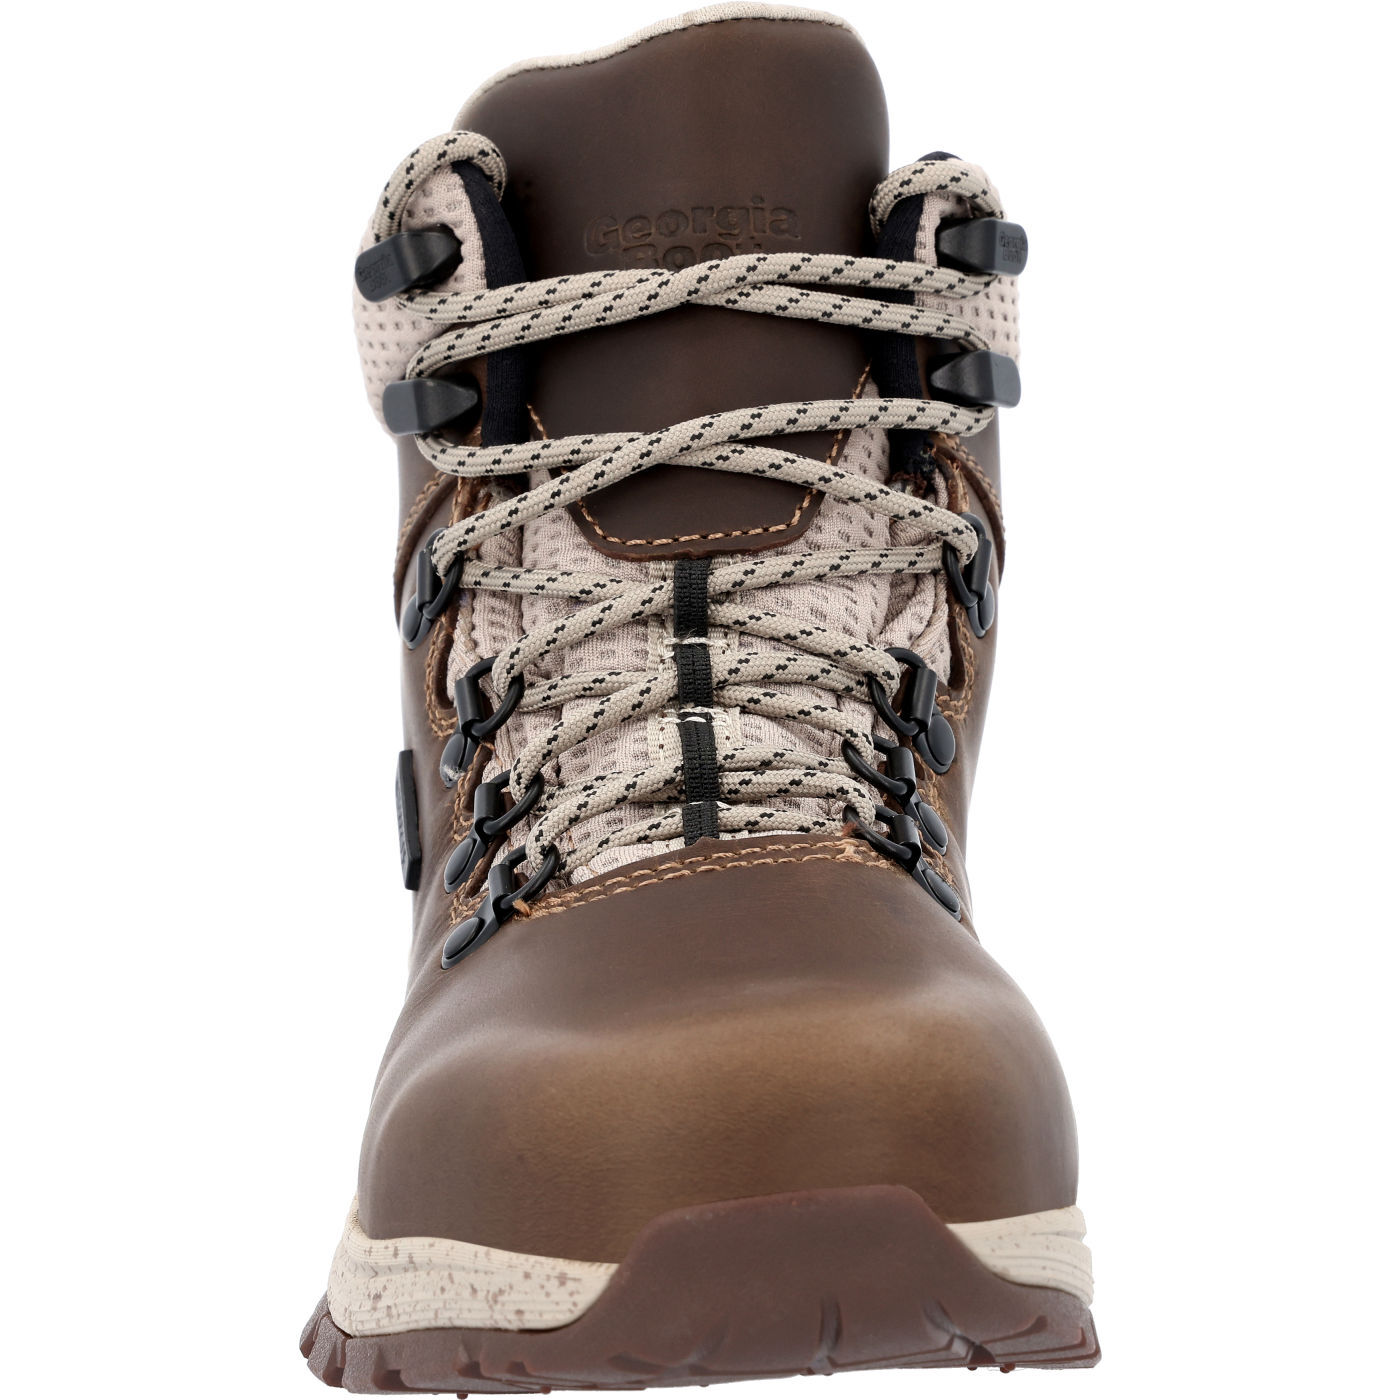 Georgia Boot Eagle Trail Women's Alloy Toe Waterproof Hiker Boots from Columbia Safety